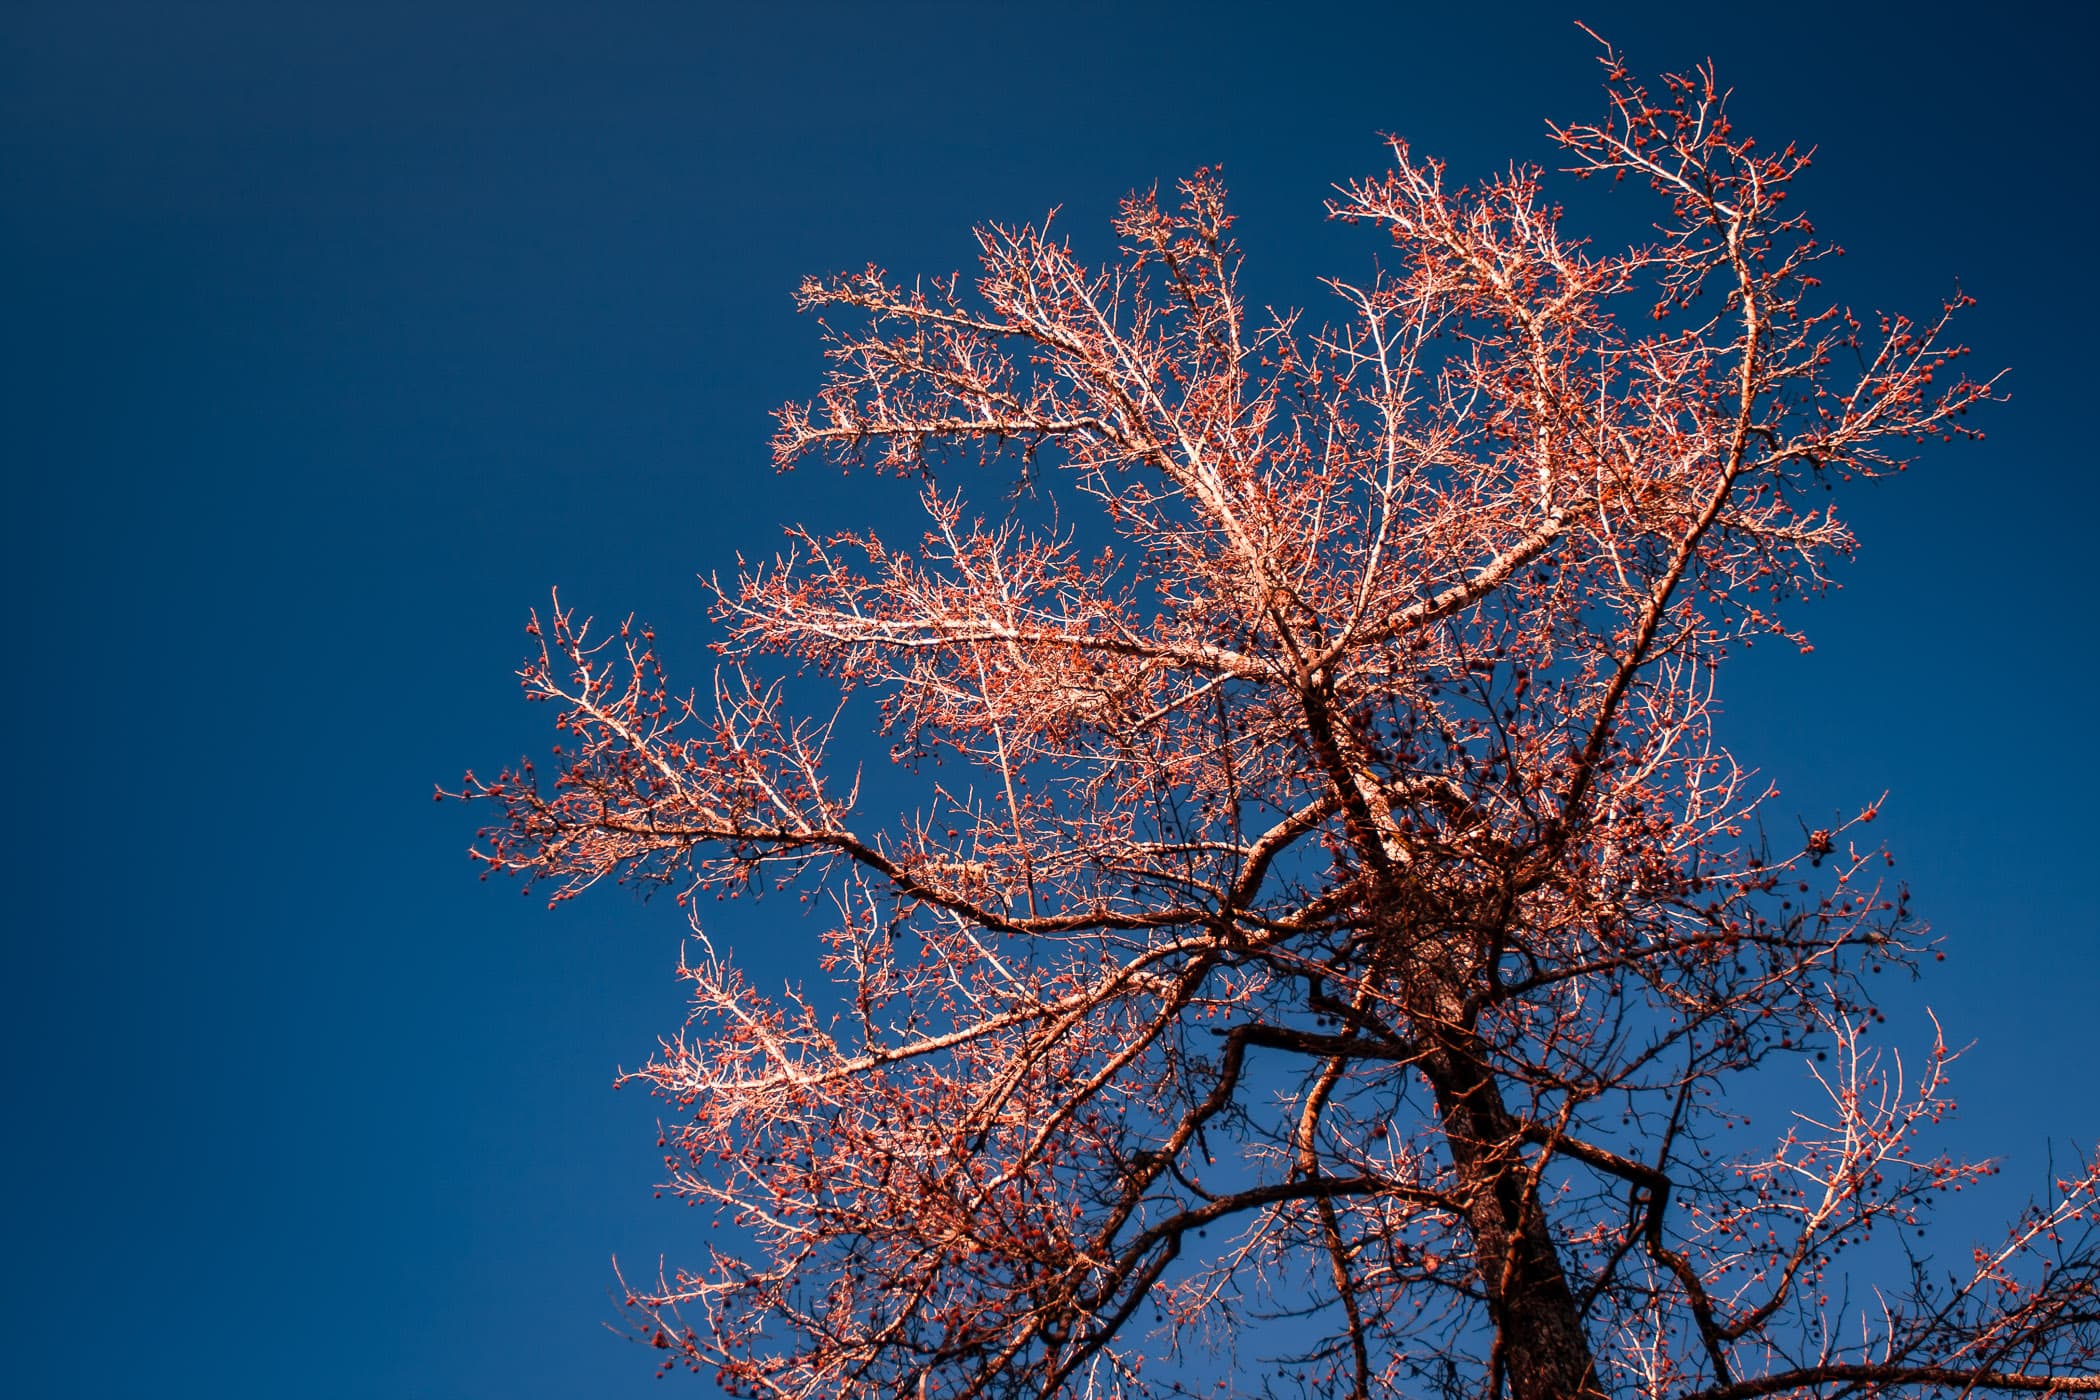 A tree rises into the blue sky over Hot Springs, Arkansas.